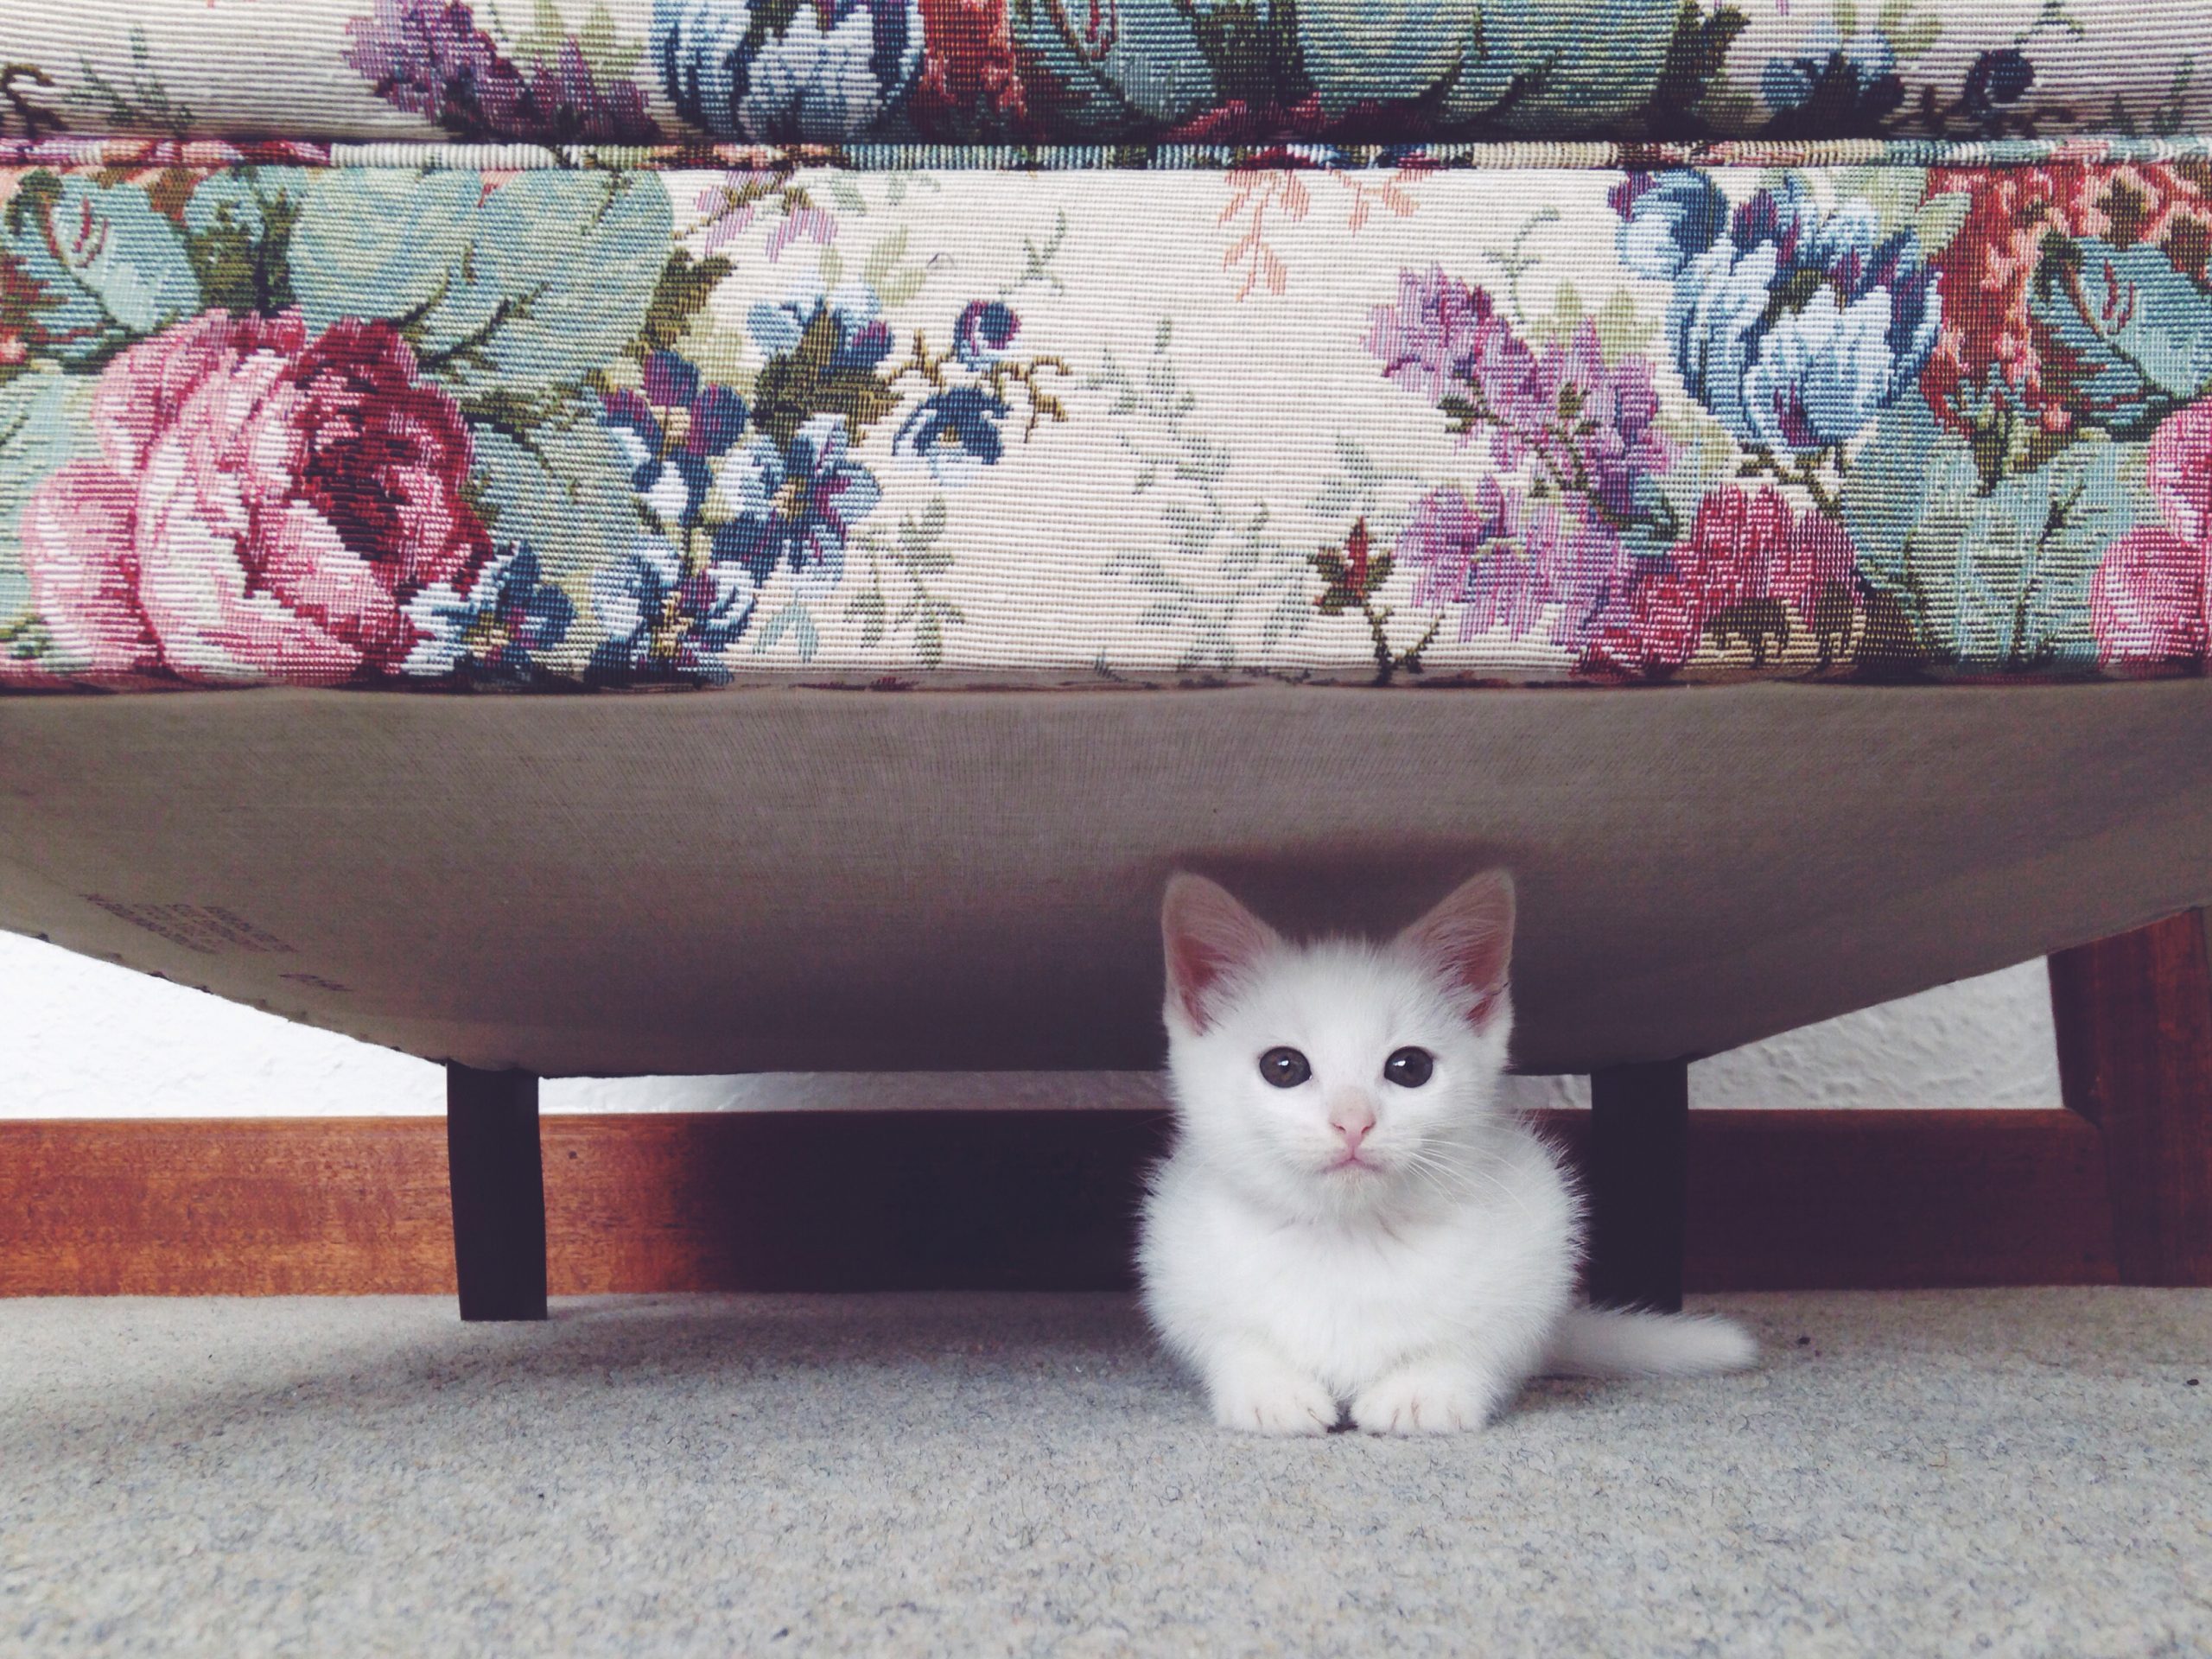 Small white kitten hiding beneath a floral couch